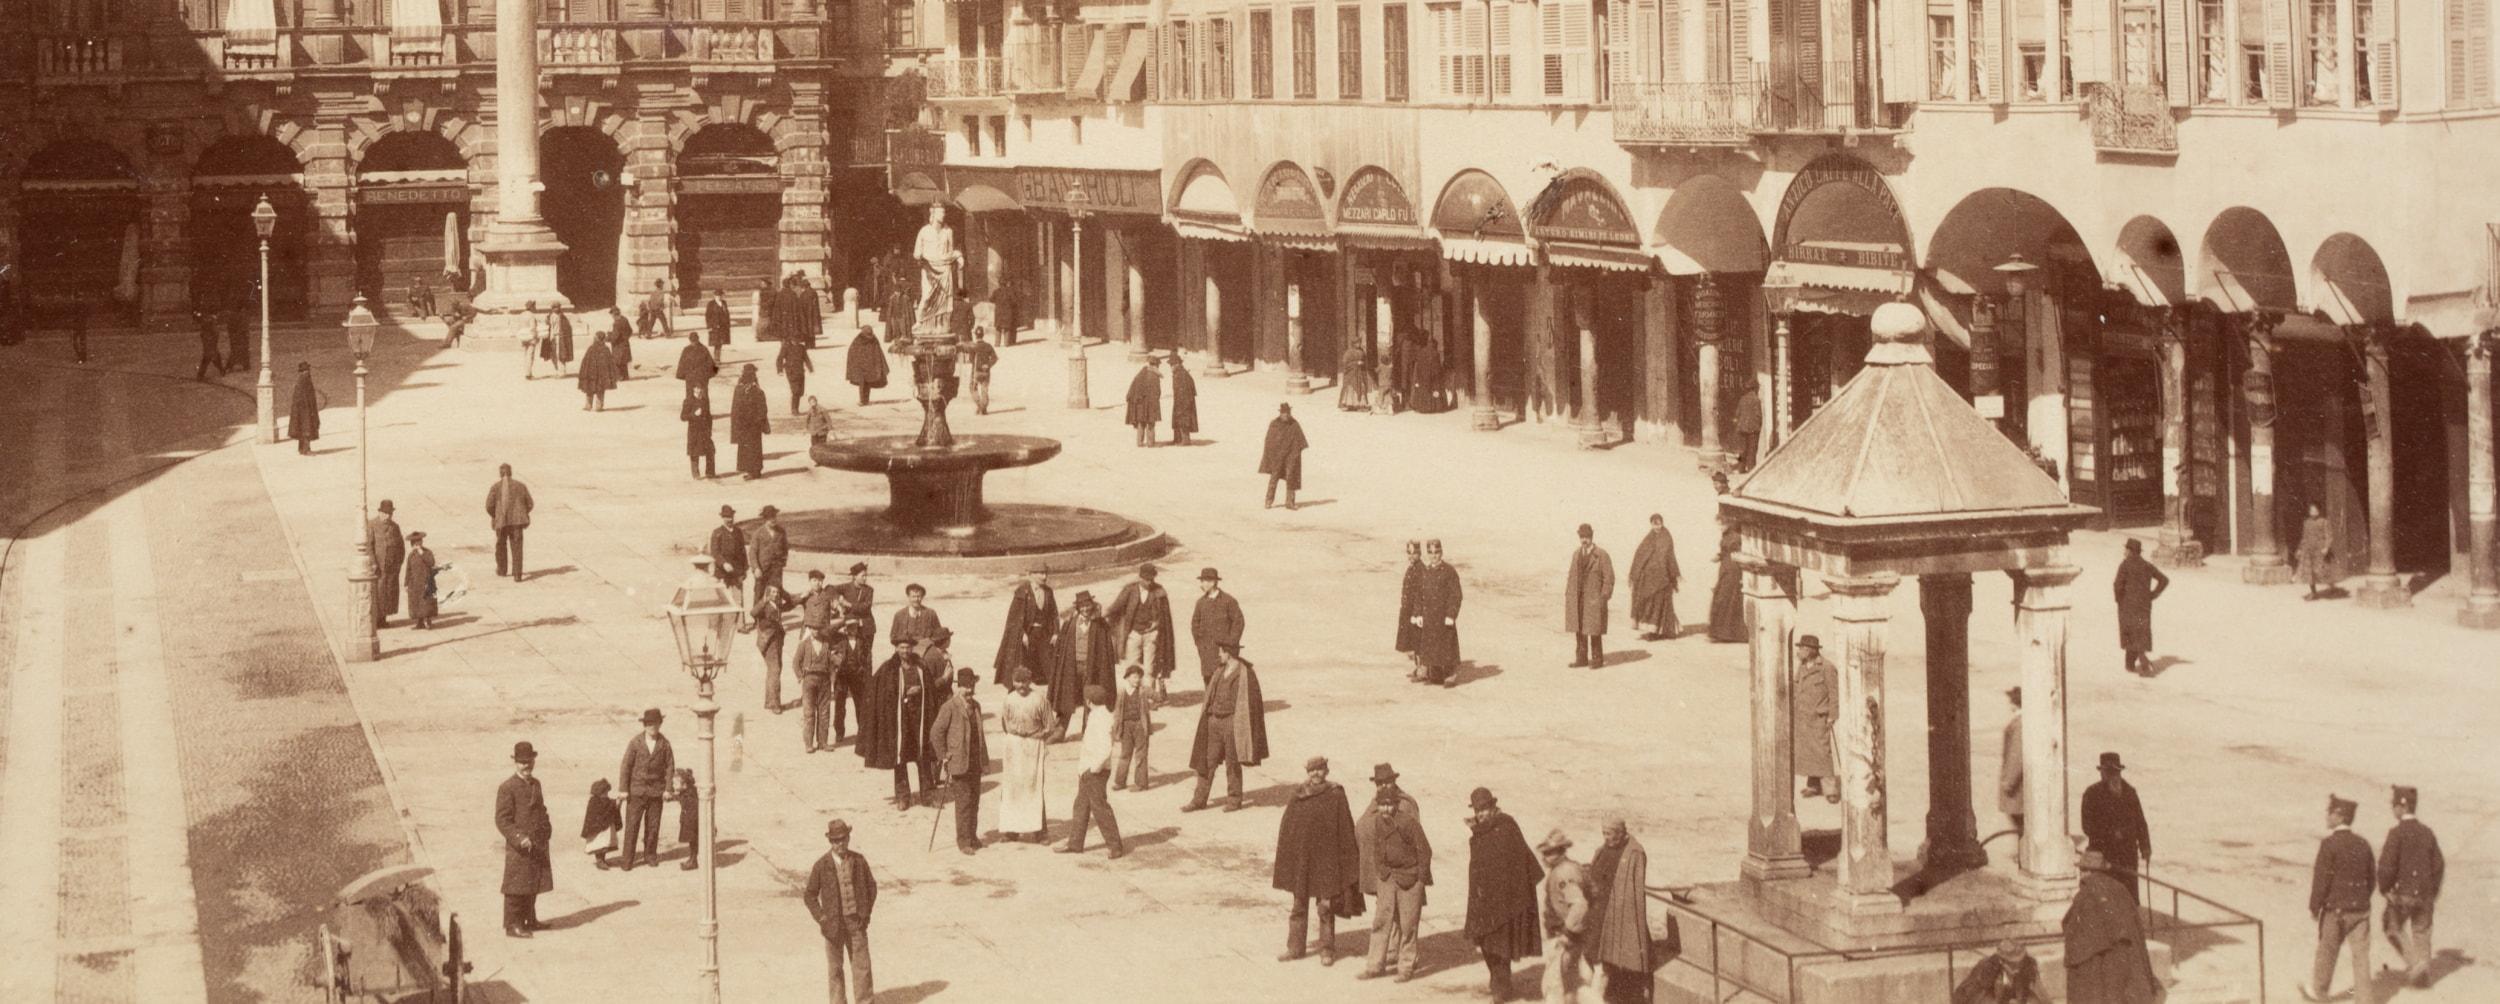 V. Florianello (19th century): View over the bustling Piazza delle Erbe with the city's inhabitants Verona marketplace, c. 1880, albumen paper print

Technique: albumen paper print

Inscription: Lower middle inscribed in the printing plate: 